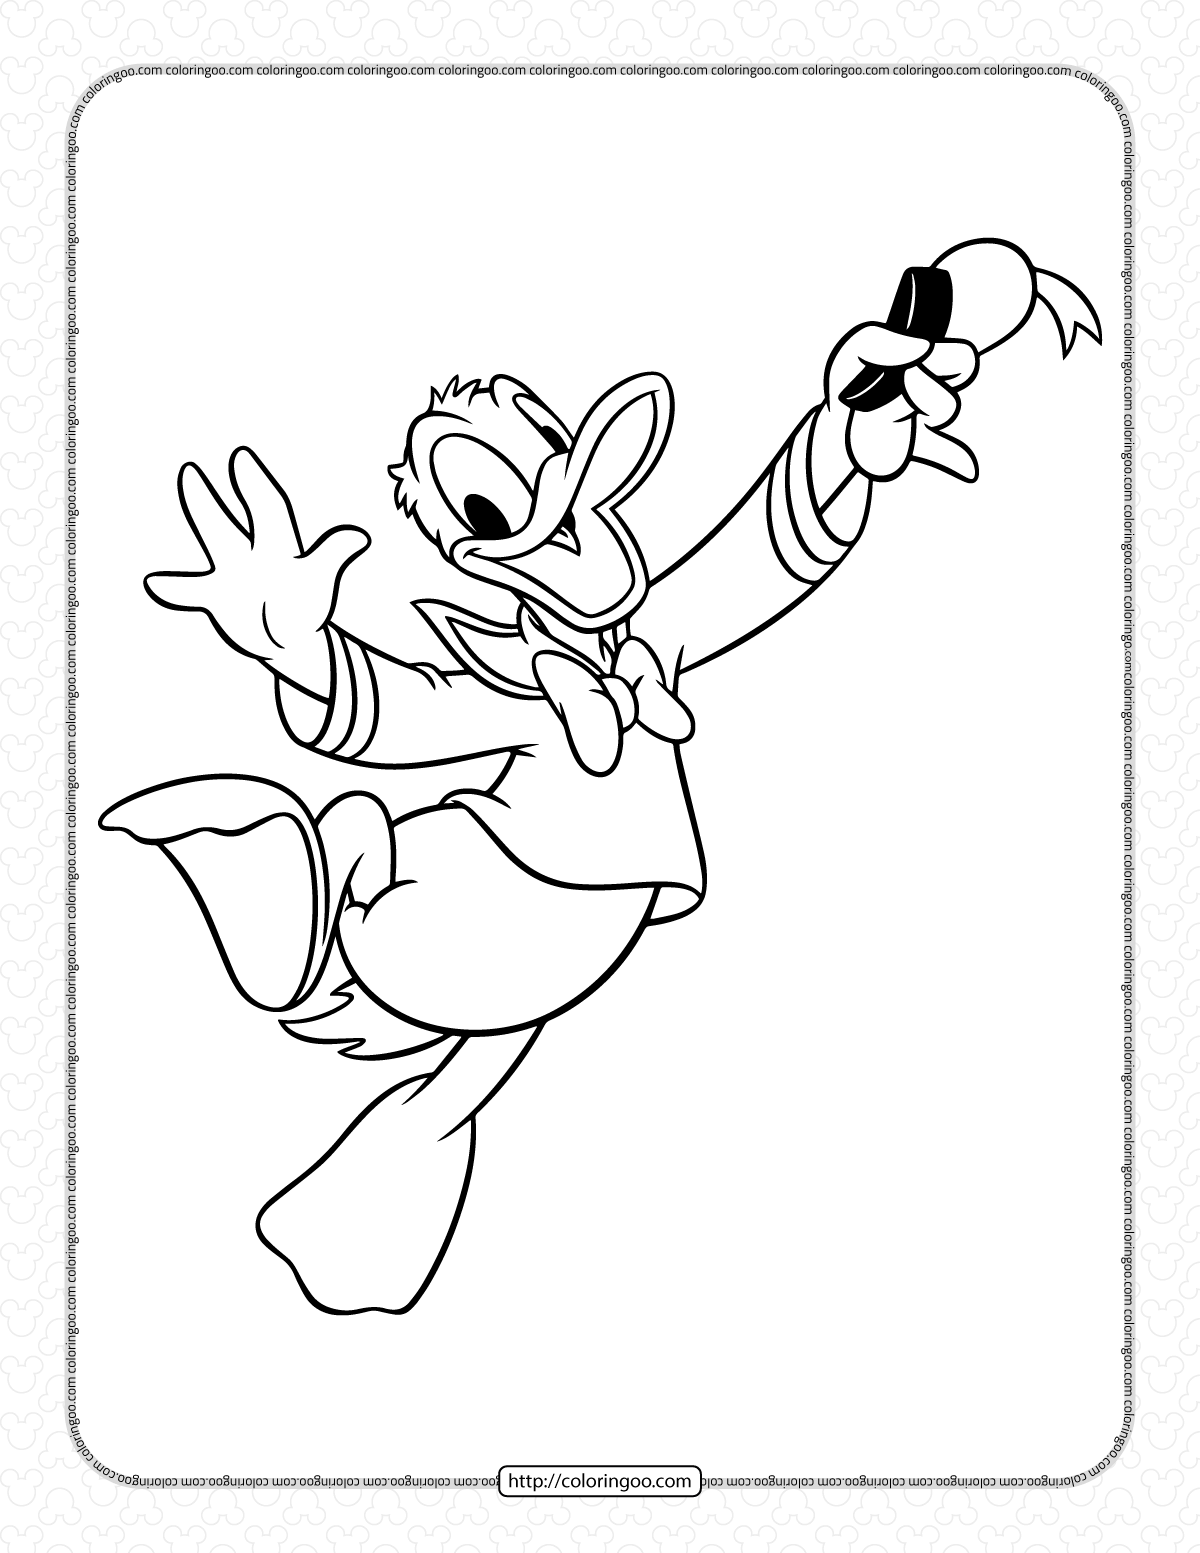 donald duck is very happy coloring page